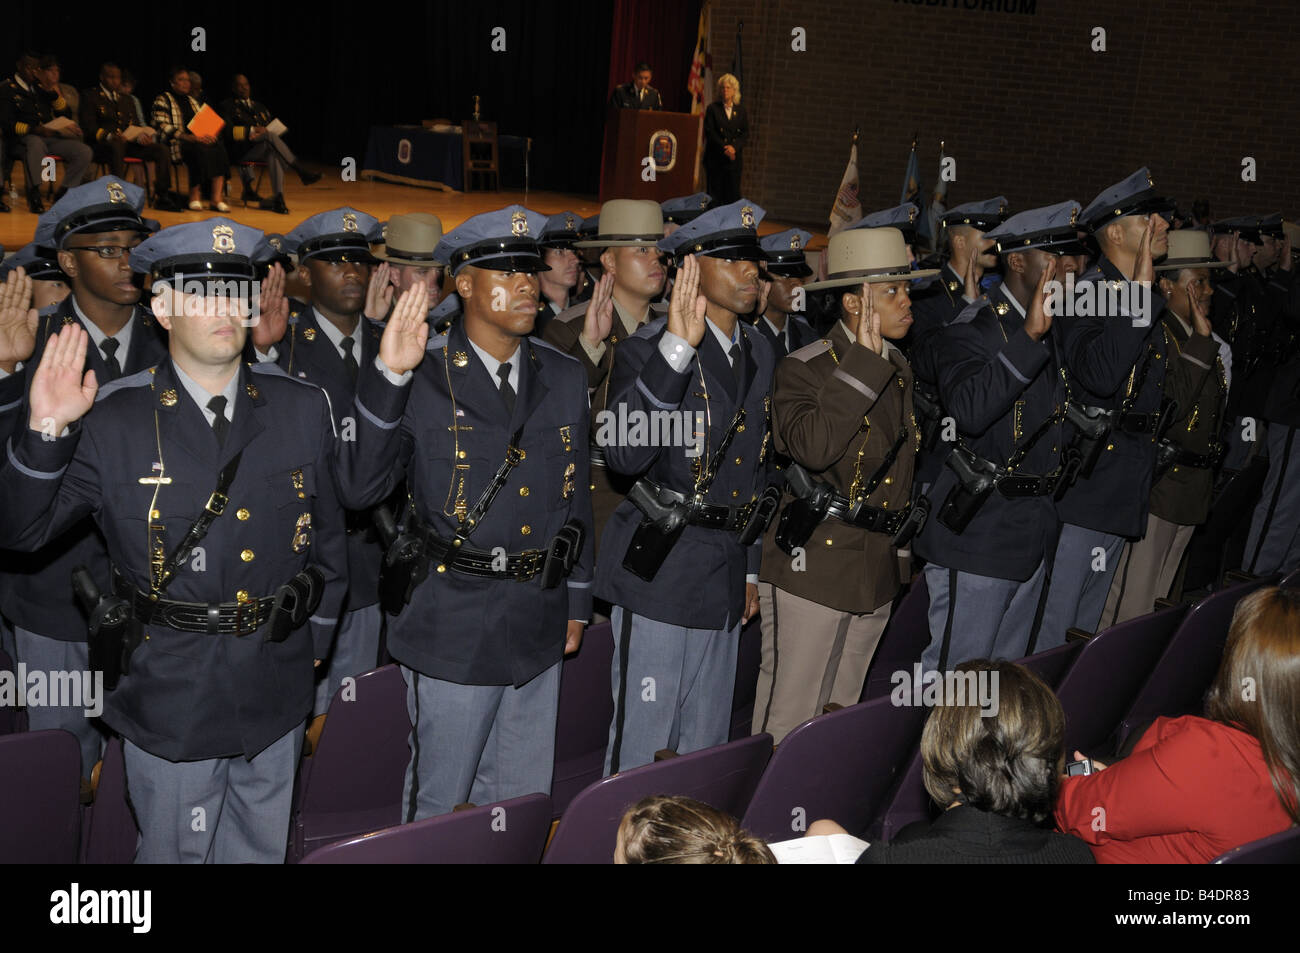 Prince George's County Police officers get sworn in at their recruit graduation in Greenbelt, Maryland Stock Photo